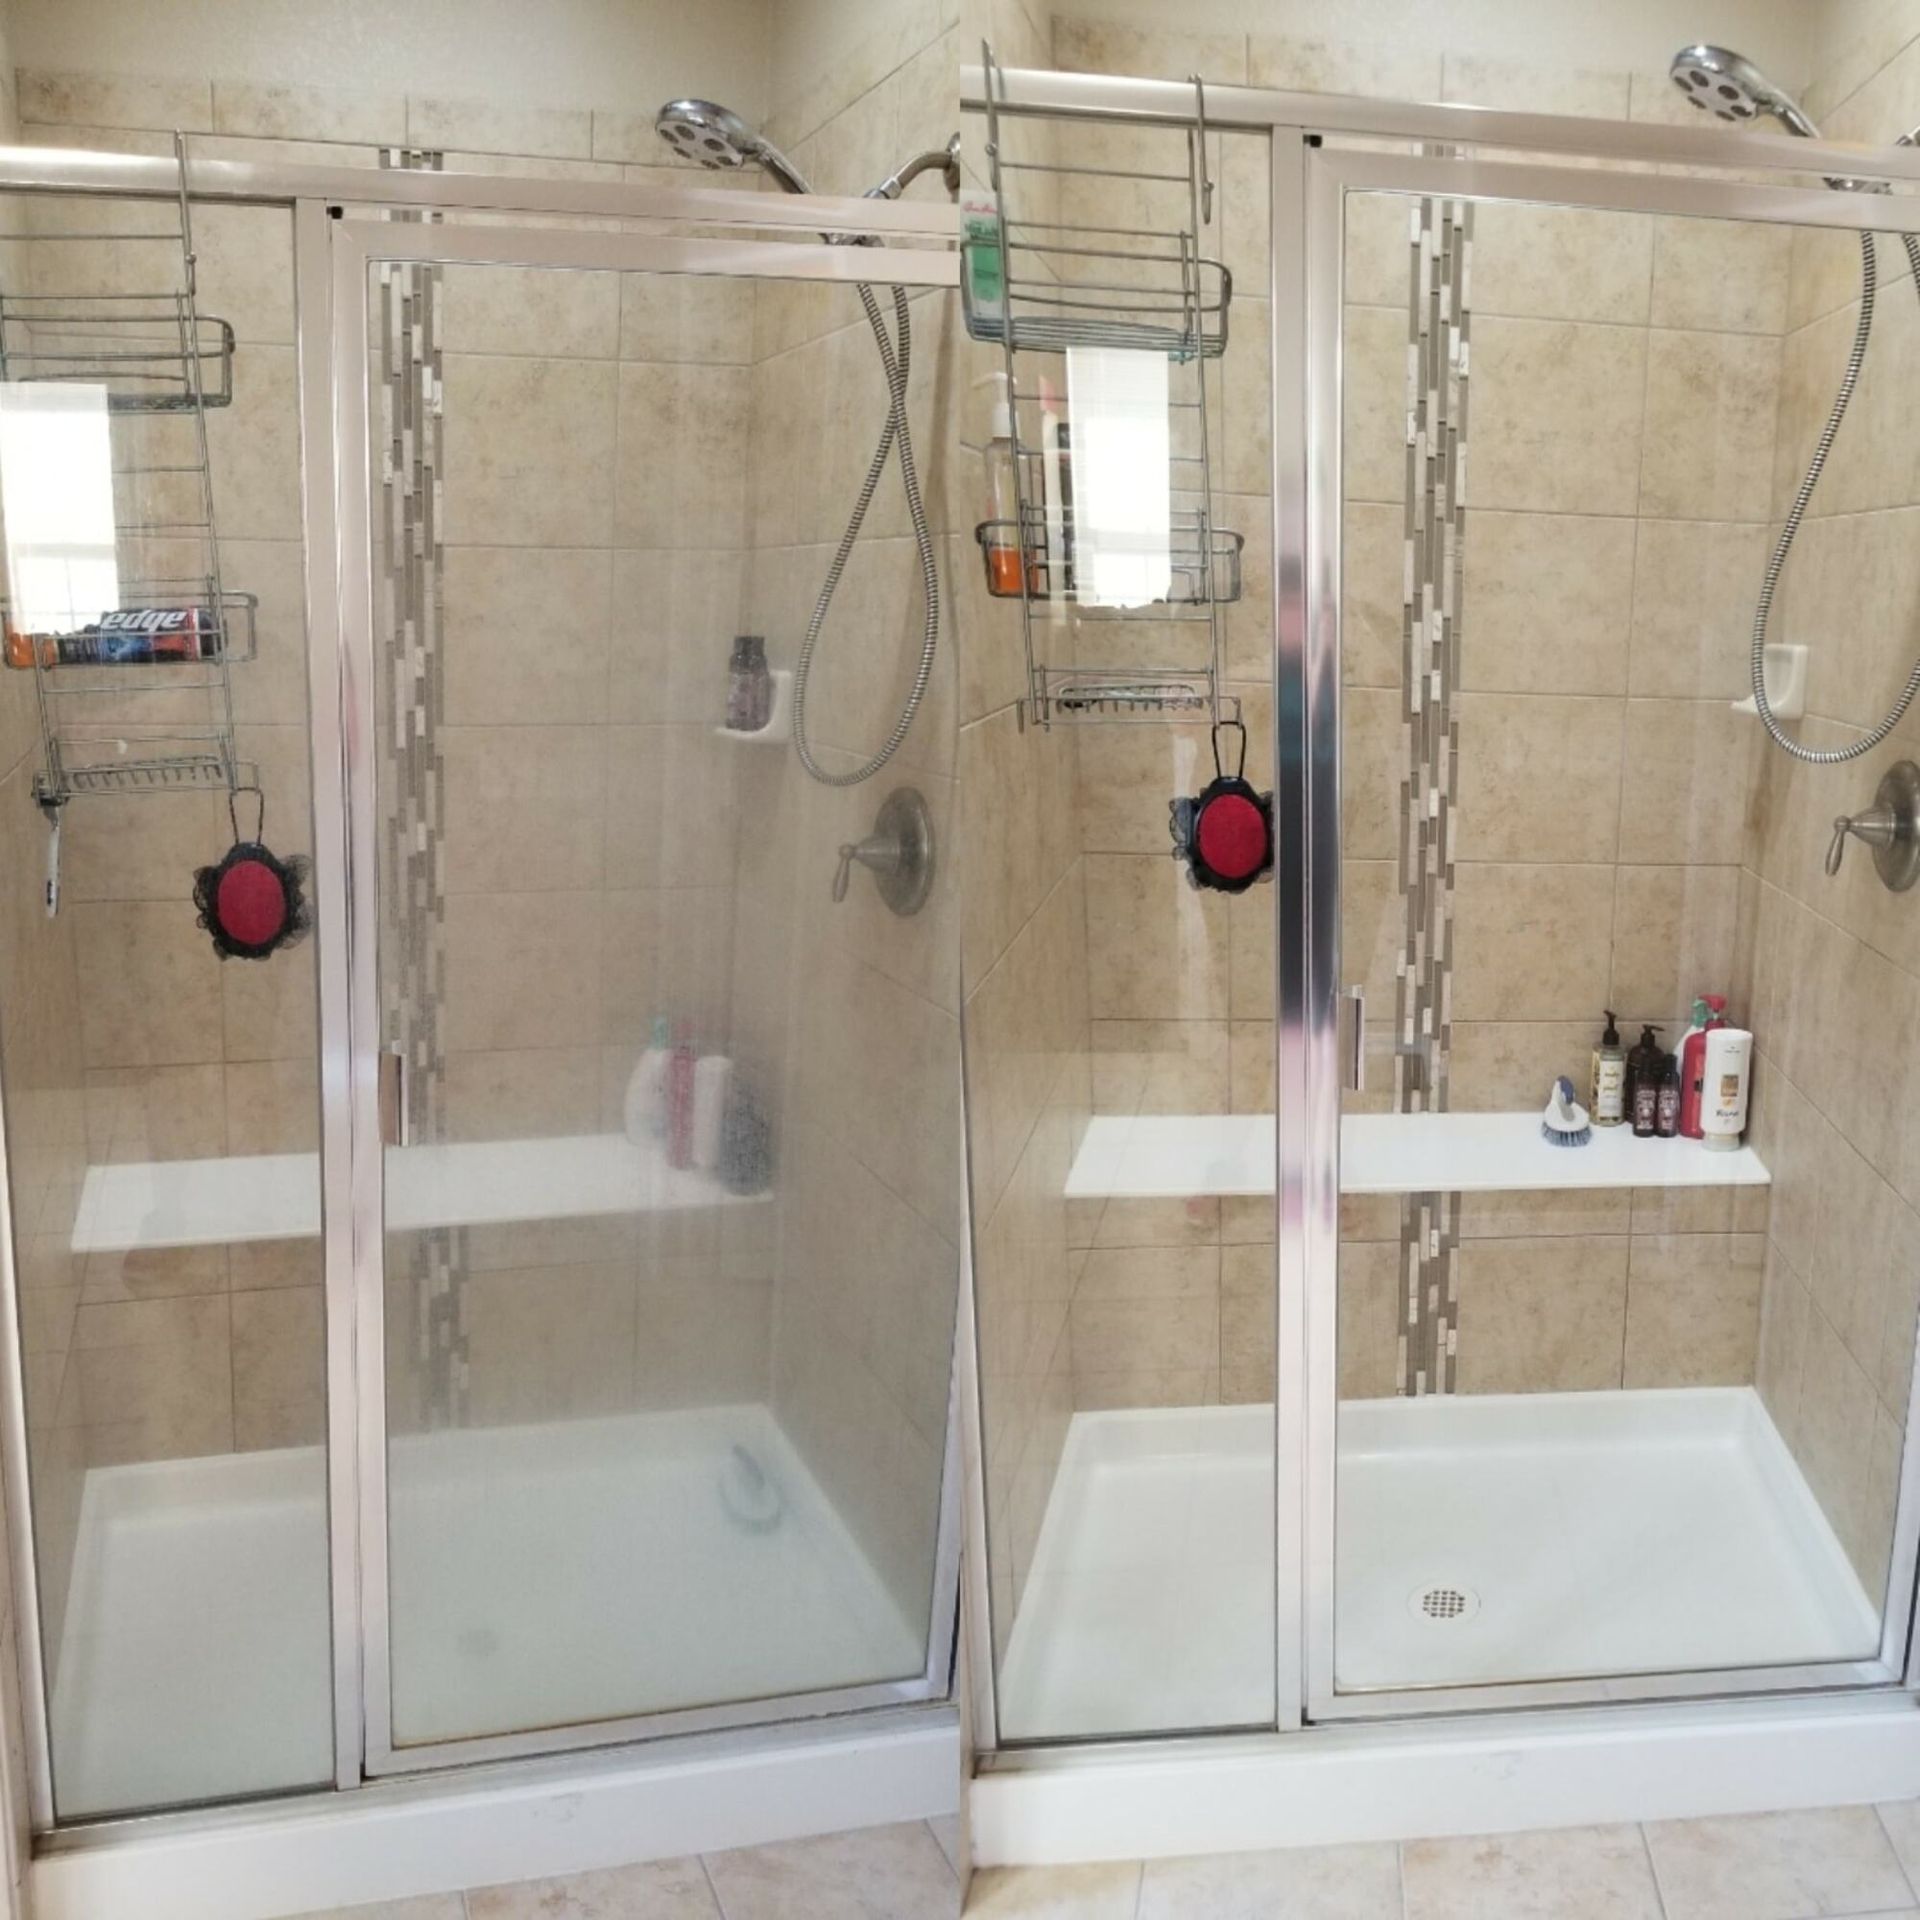 A bathroom with three shower stalls with sliding glass doors